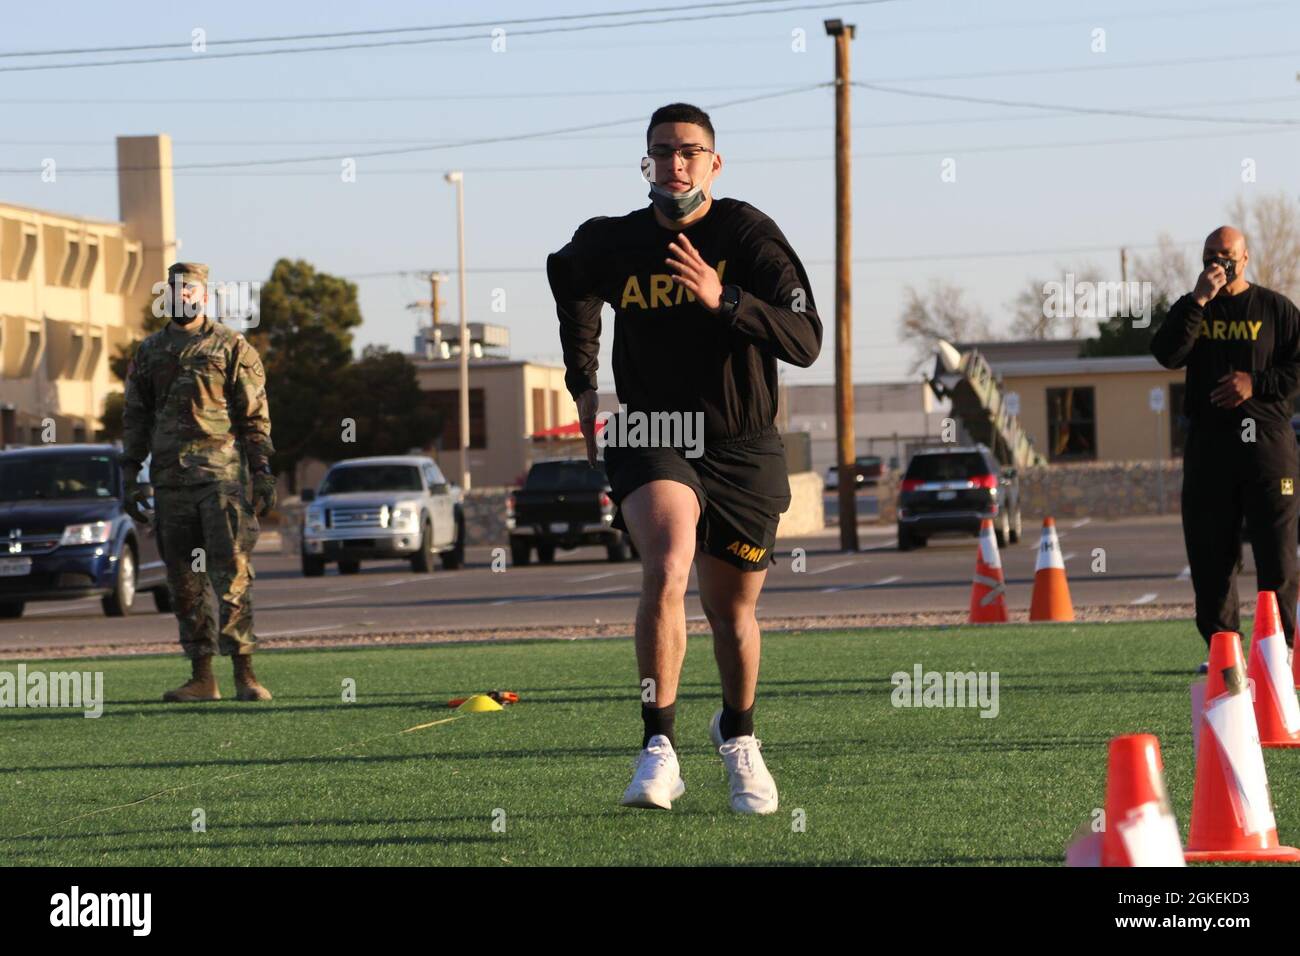 Spc. Jorge Rivera-Jimenez, a Religious Affairs Specialist (56M) assigned to 69th Air Defense Artillery Brigade, runs through the 'sprint-drag-carry' event during the ACFT here at Fort Bliss, Texas. Stock Photo